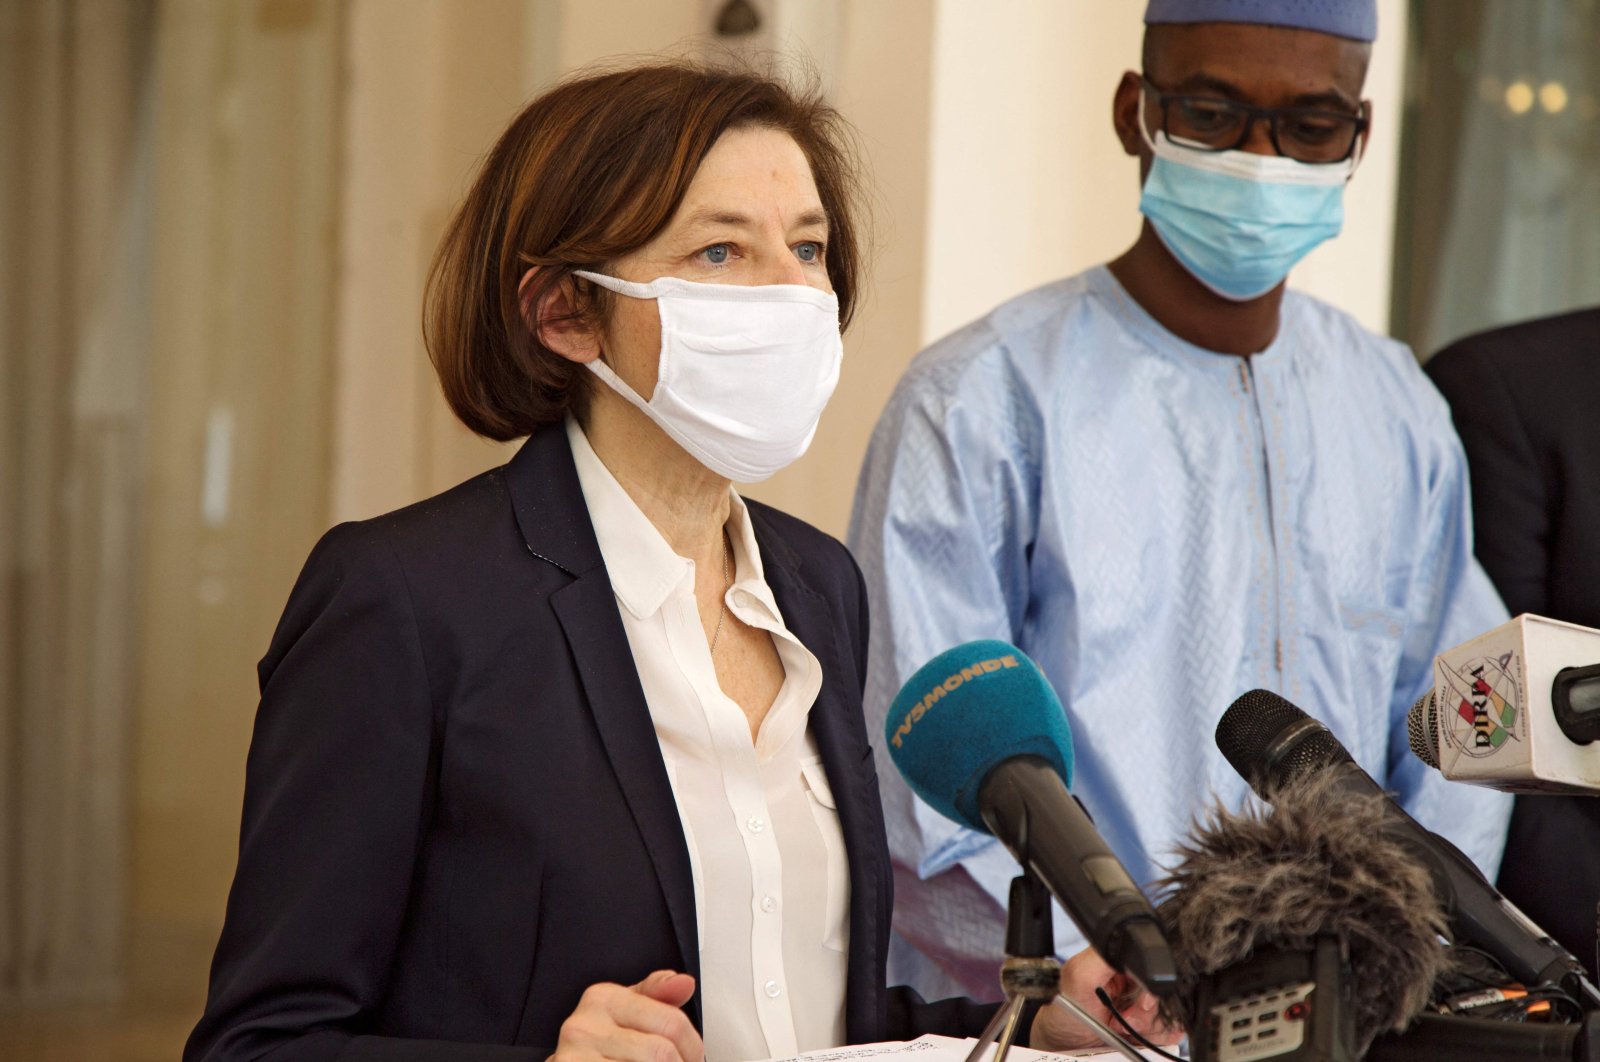 French Minister of the Armed Forces, Florence Parly (L), addresses the media after talks with Malian President, Bah Ndaw, at the Presidential Palace in Bamako, Mali on April 1, 2021. (AFP Photo)